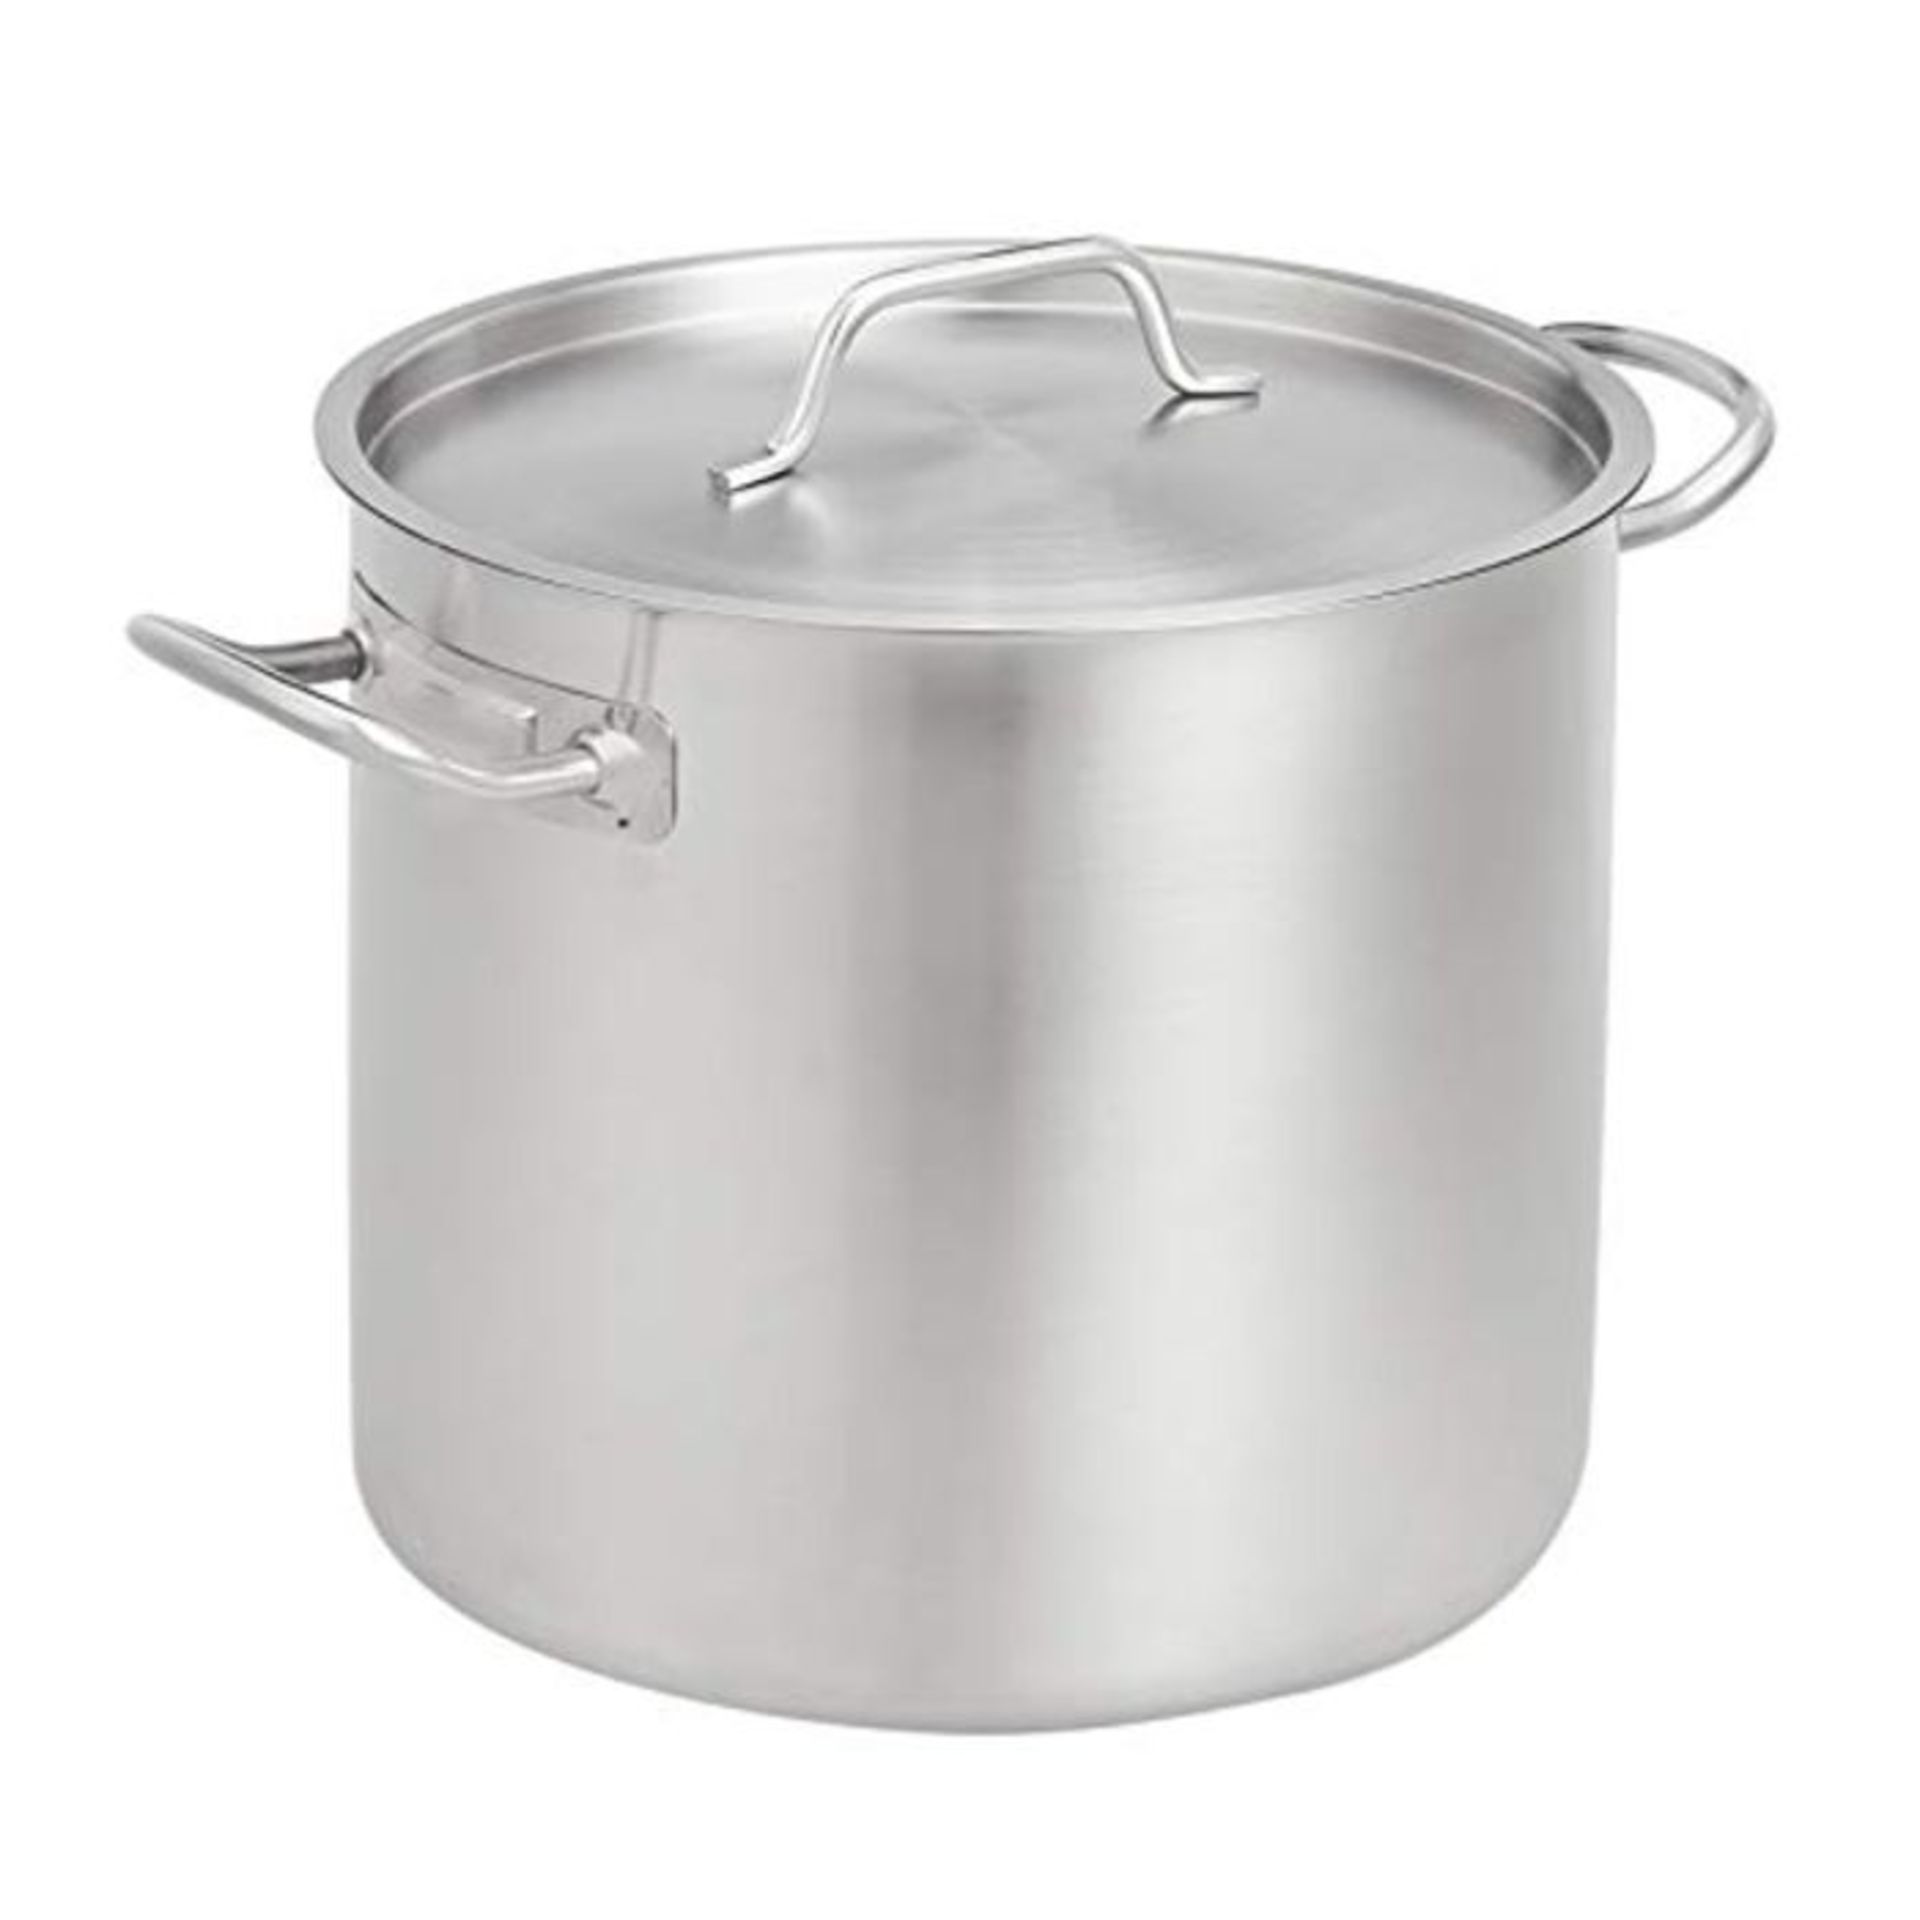 AmazonCommercial 15.2 l Stainless Steel Aluminium-Clad Stock Pot with Cover